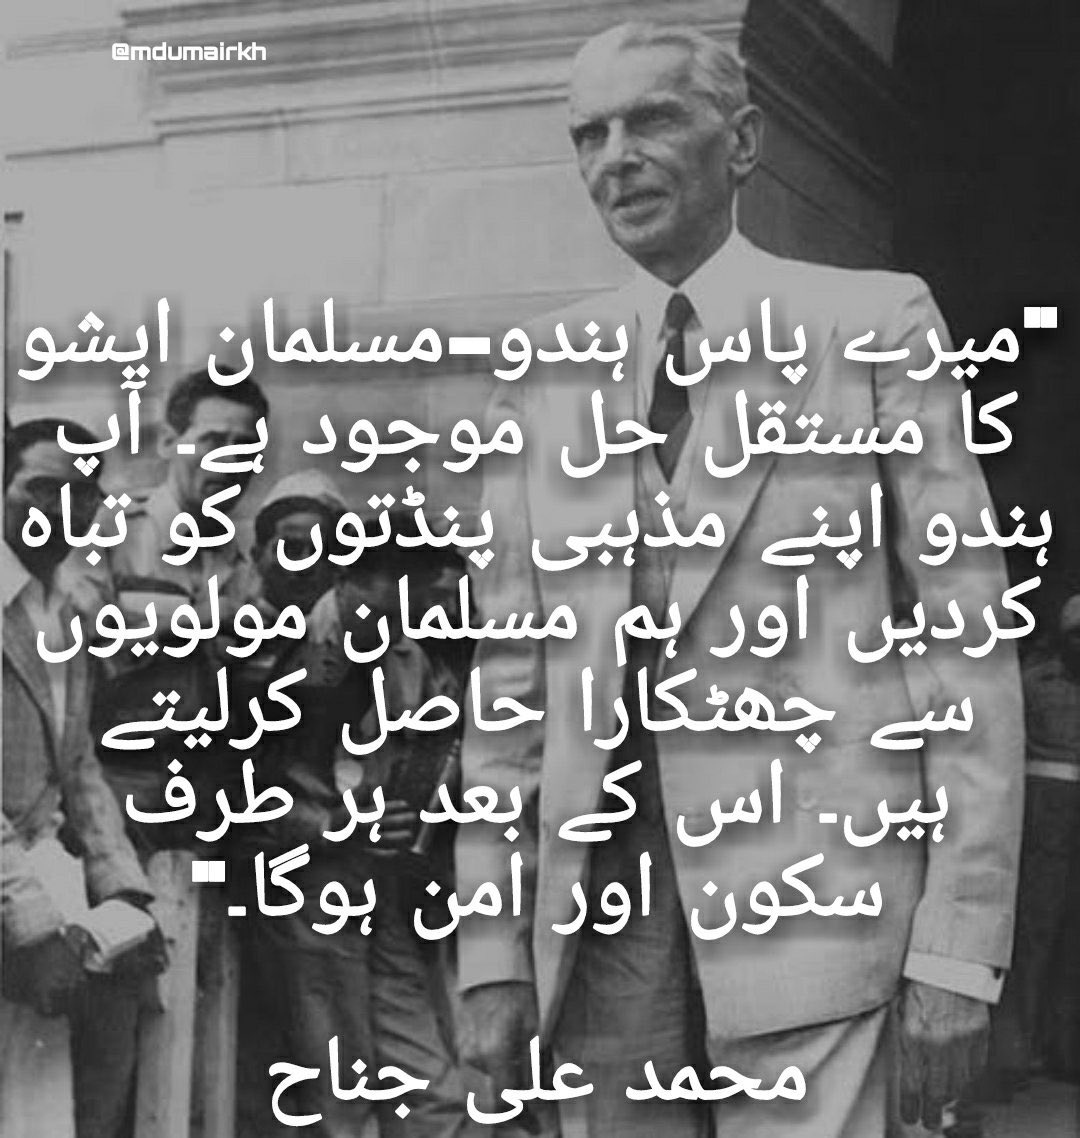 How to achieve peace in South Asia: Jinnah’s solution.